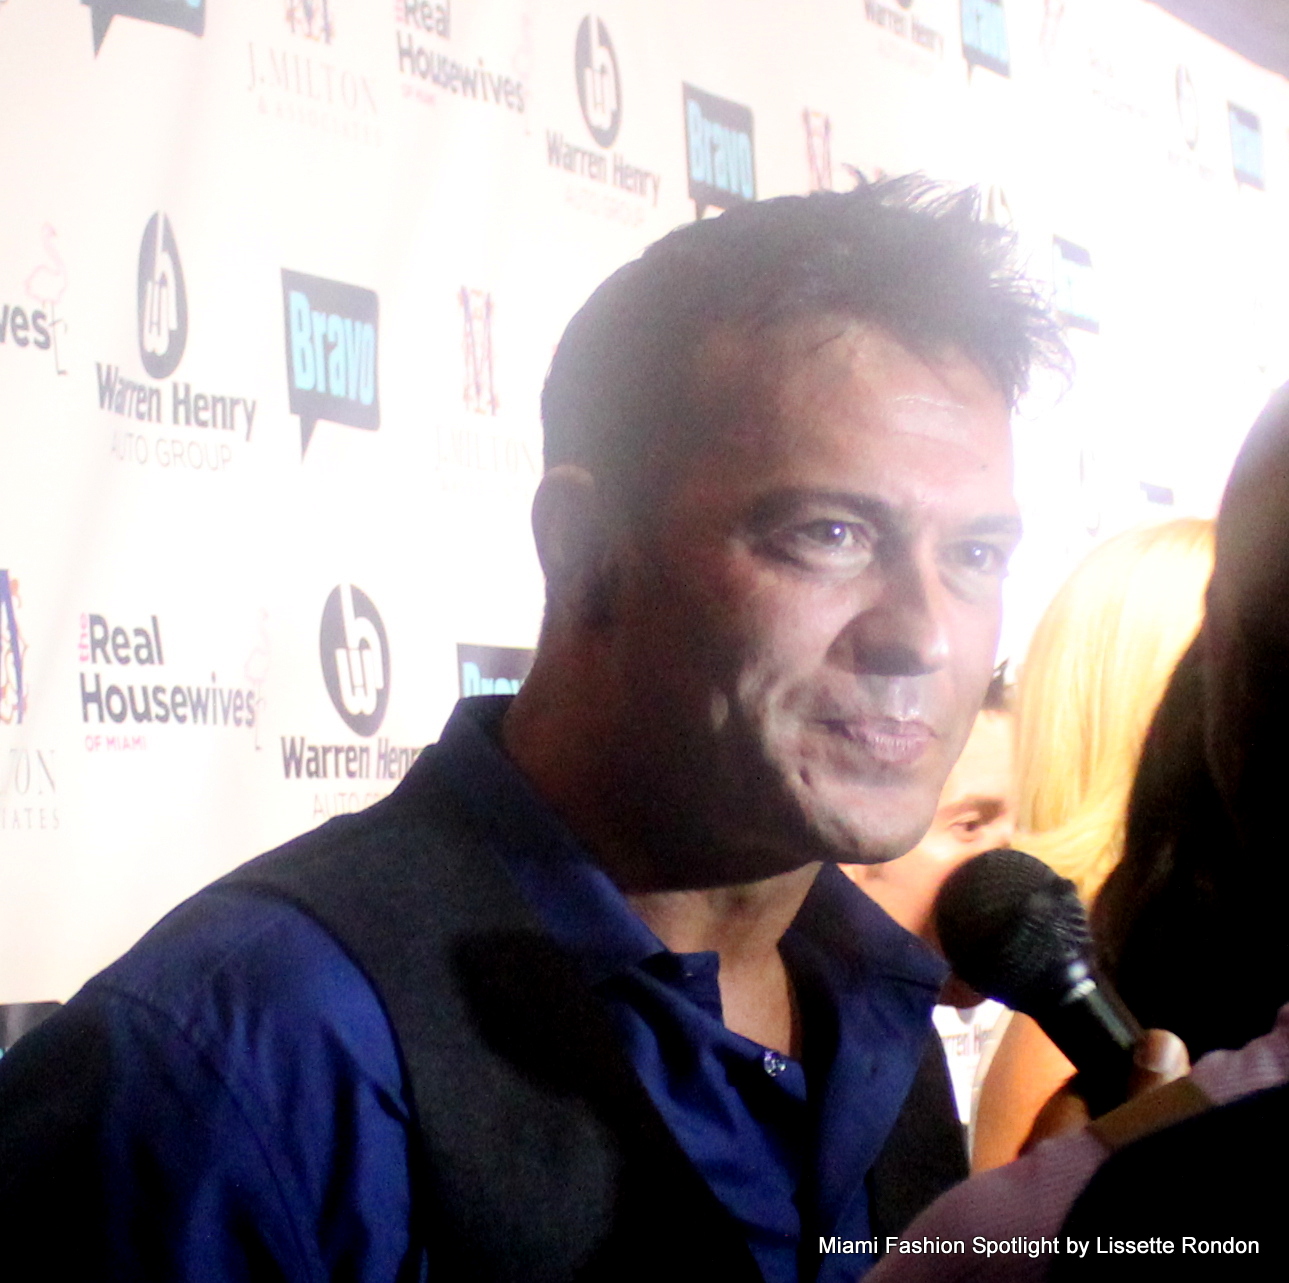 Romain Zago attending the "Real Housewives of Miami" season 3 premier party.